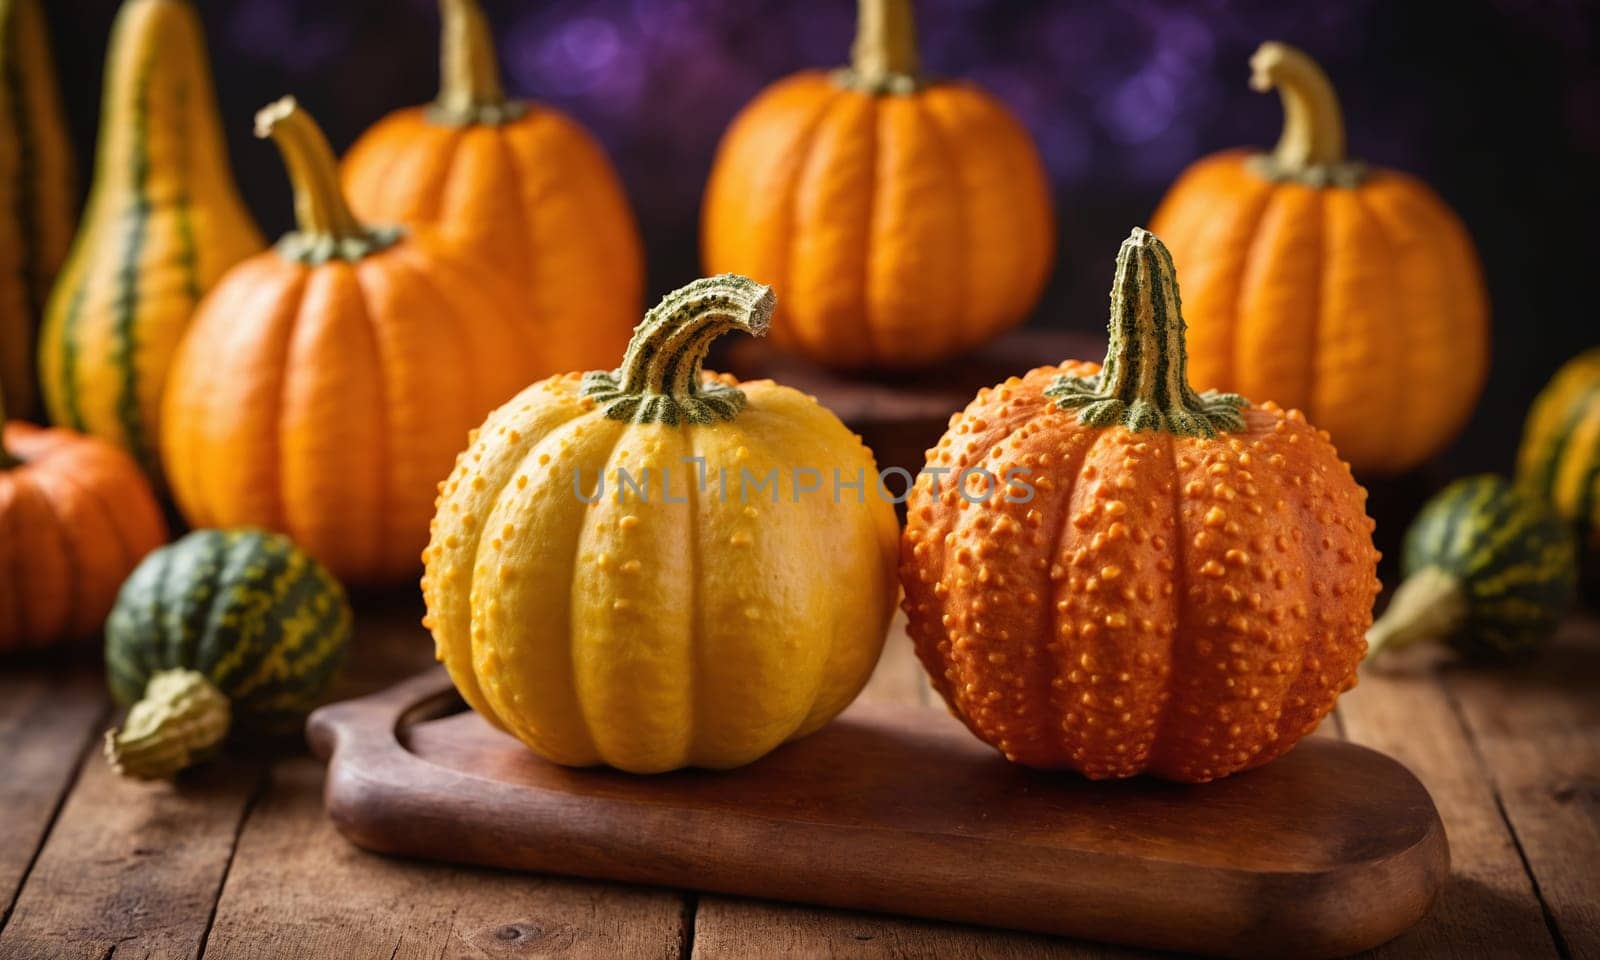 The table is adorned with a variety of pumpkins and candles, creating a cozy atmosphere. The orange winter squash and natural foods add a warm touch to the wooden table